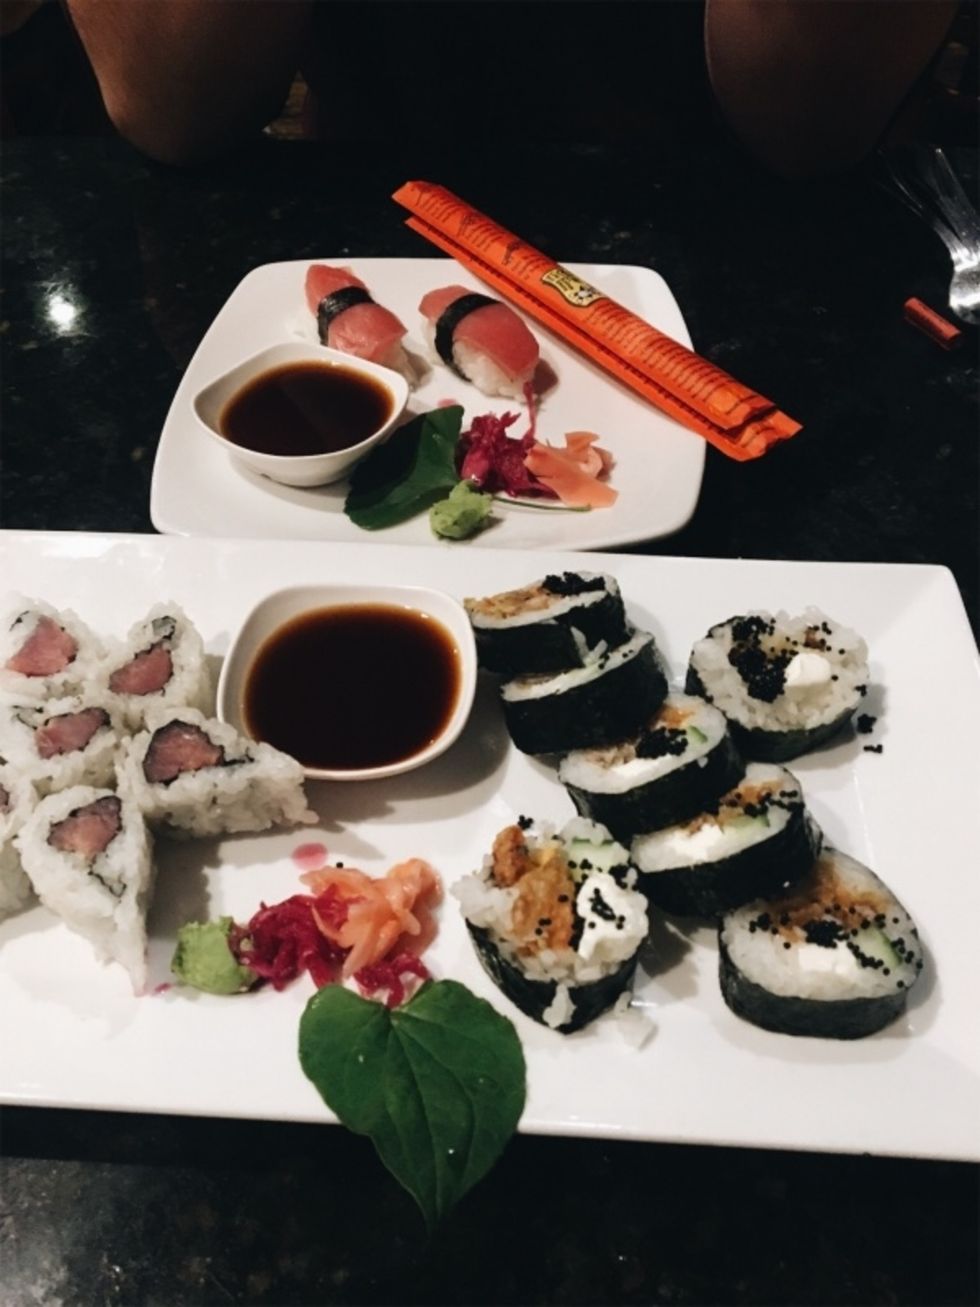 11 Of The Best Places To Get Sushi In Central Ohio